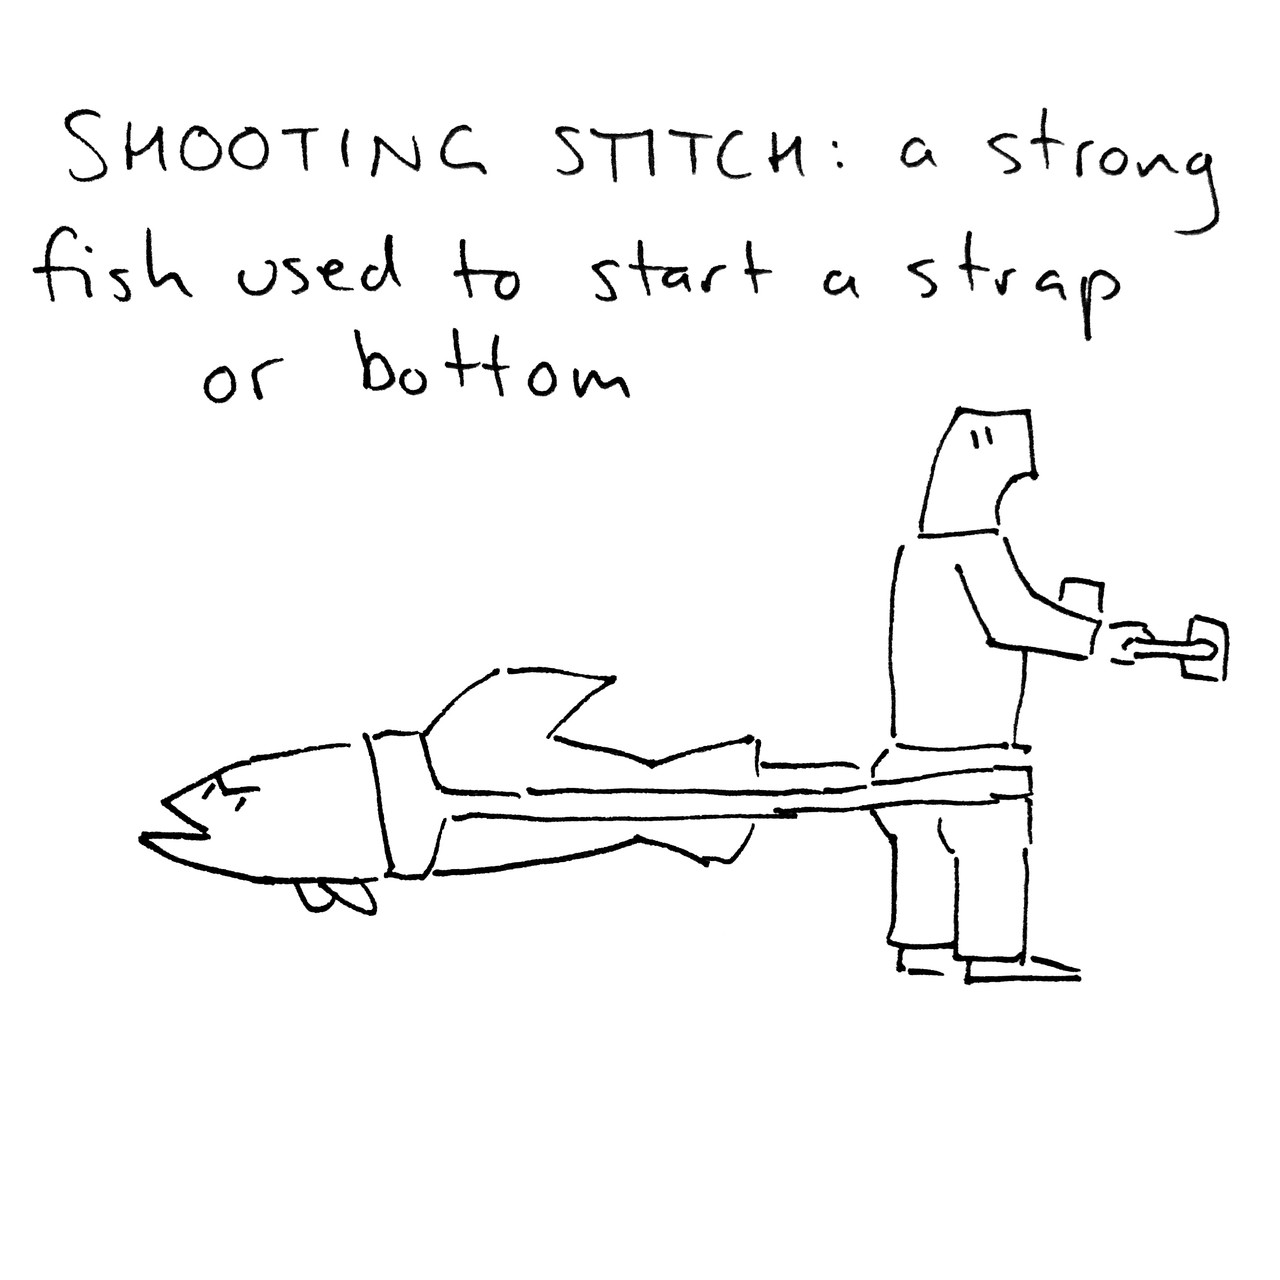 SHOOTING STITCH: a strong fish used to start a strap or bottom. The drawing shows a figure on the left bracing themselves on a bar, facing away from a large fish who is strapped to their midriff.